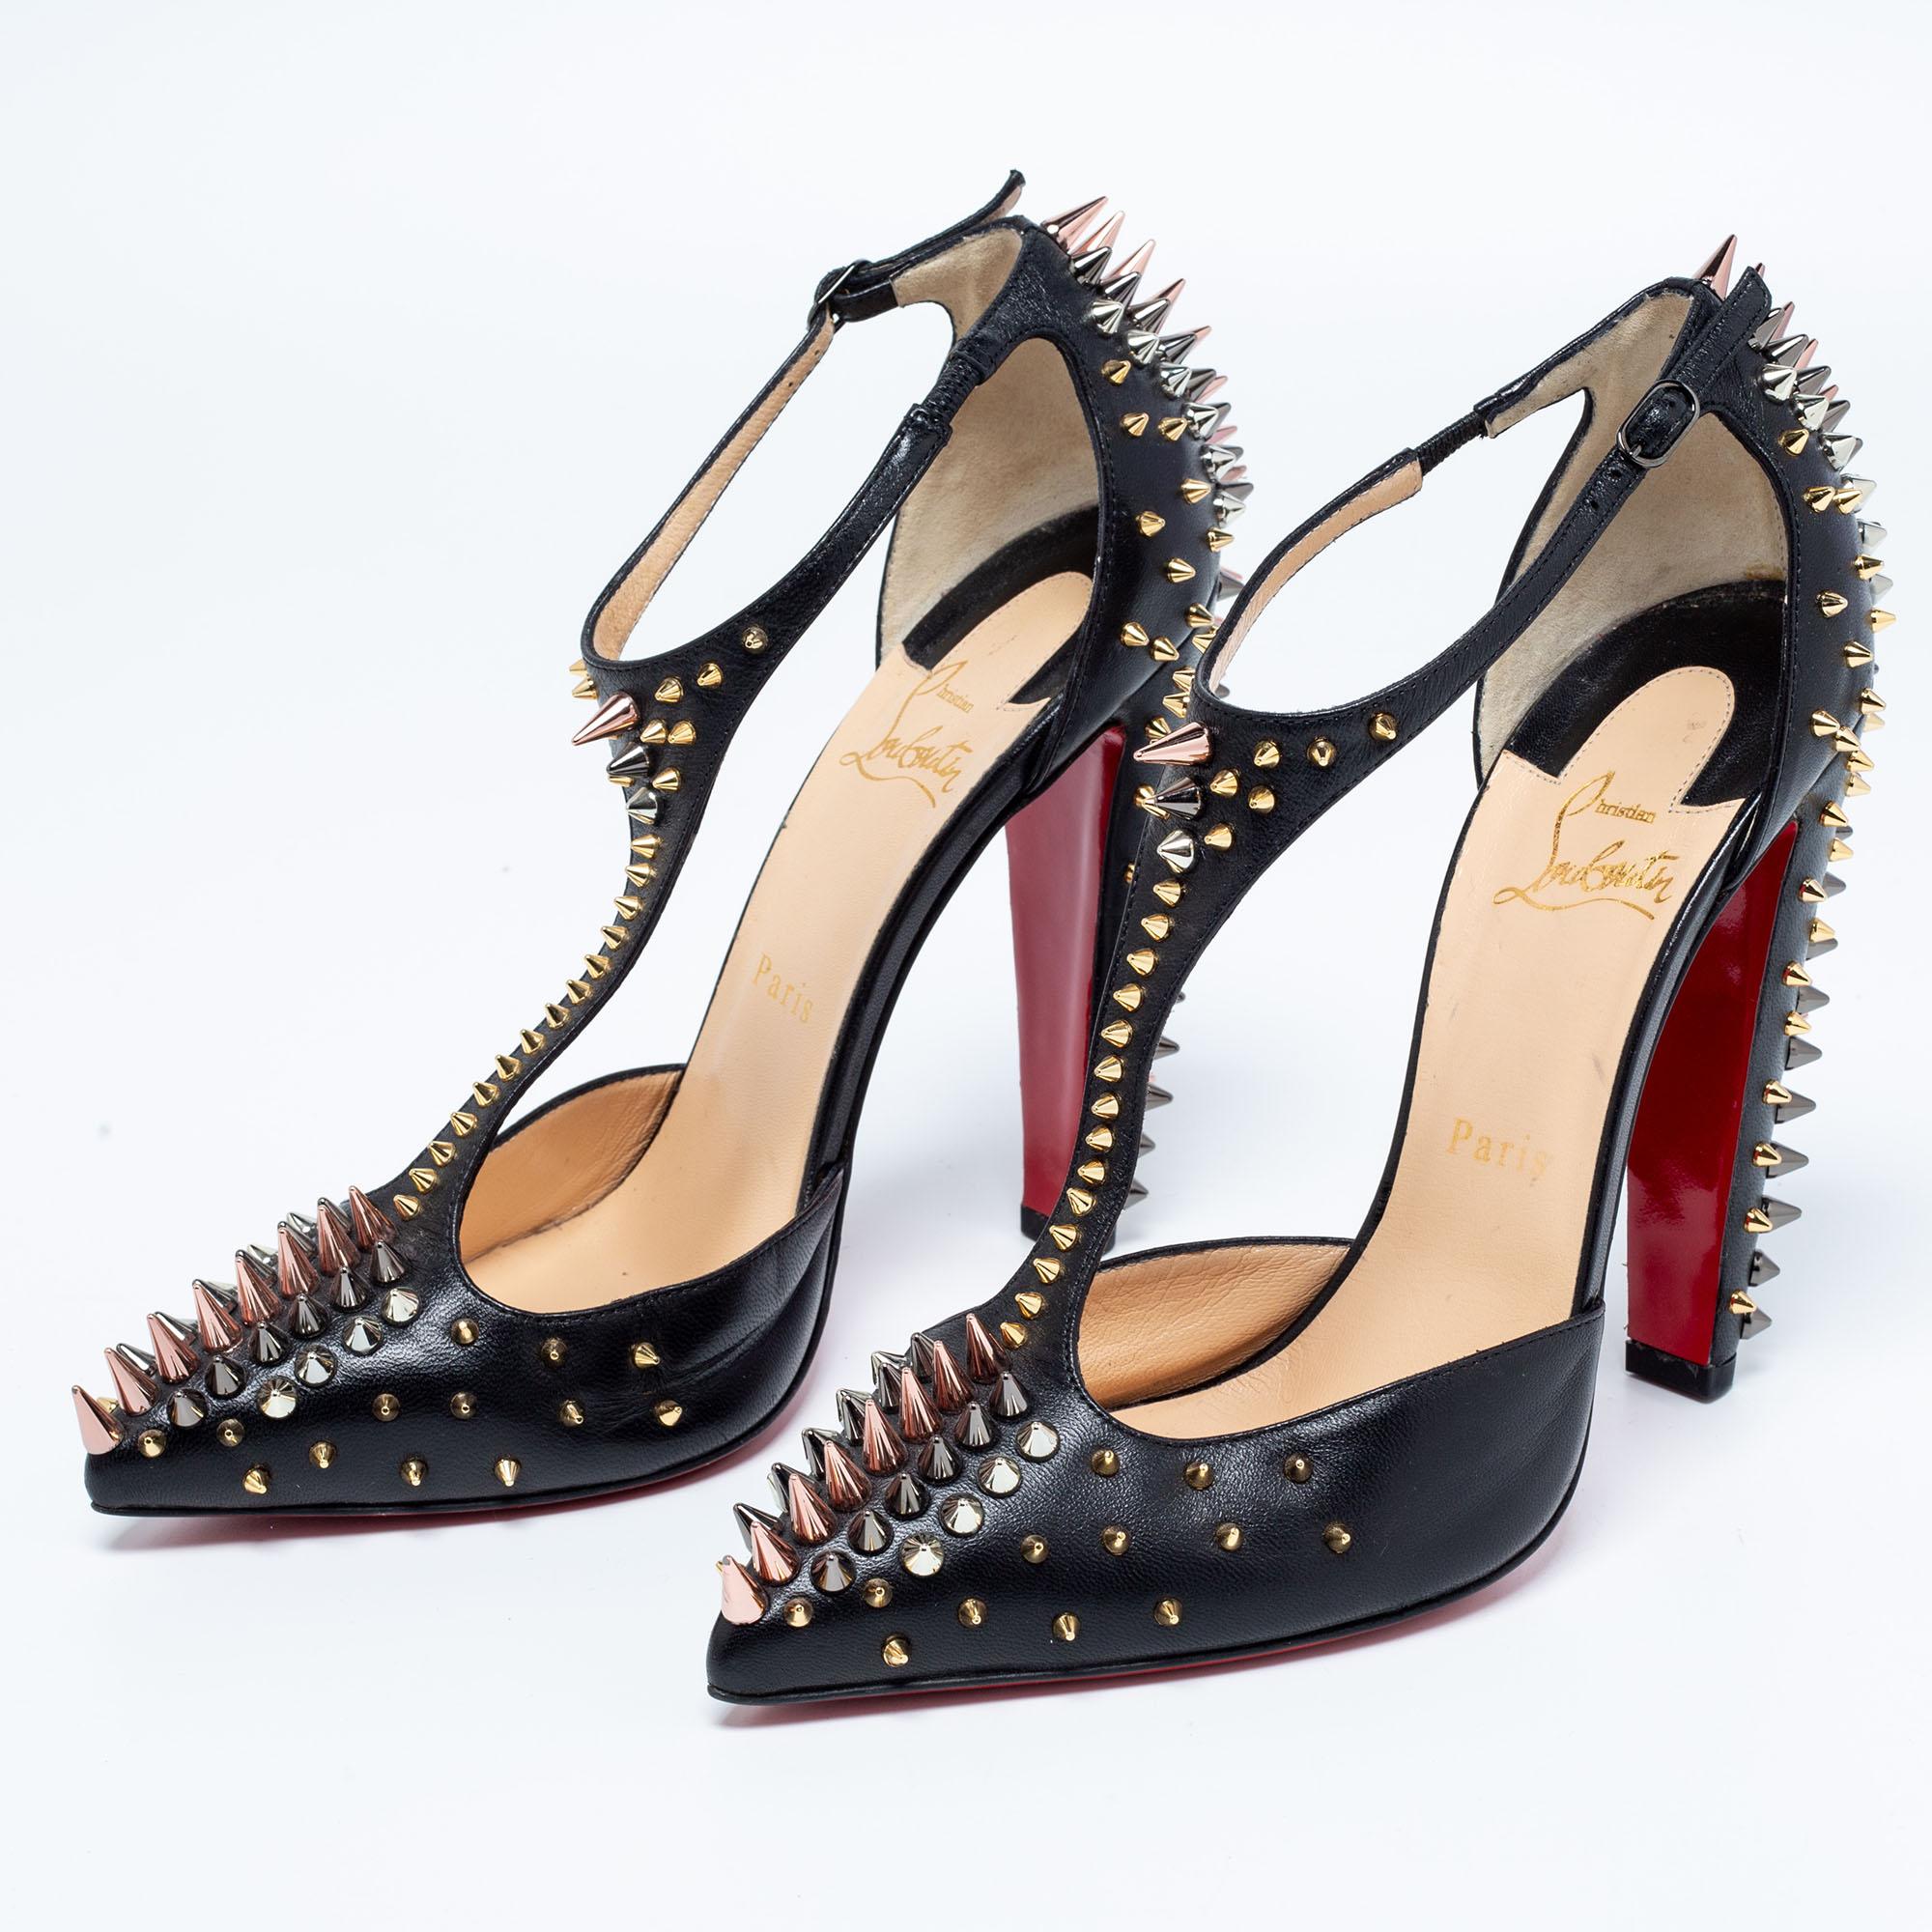 Women's Christian Louboutin Black Leather Goldostrap Spiked Pumps Size 39.5